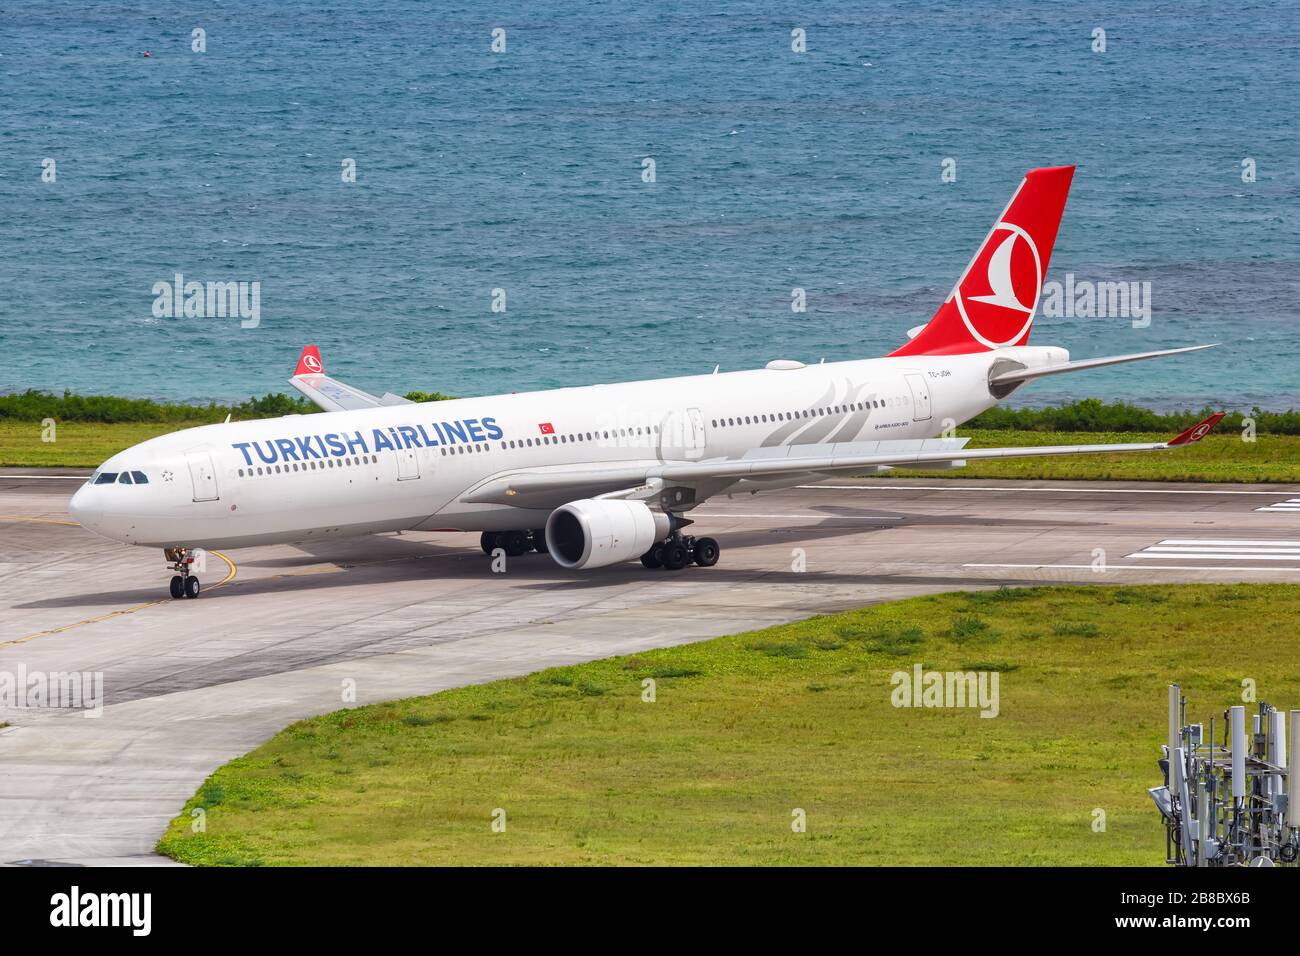 Mahe, Seychelles – February 3, 2020: Turkish Airlines Airbus A330 airplane at Mahe airport (SEZ) in the Seychelles. Stock Photo